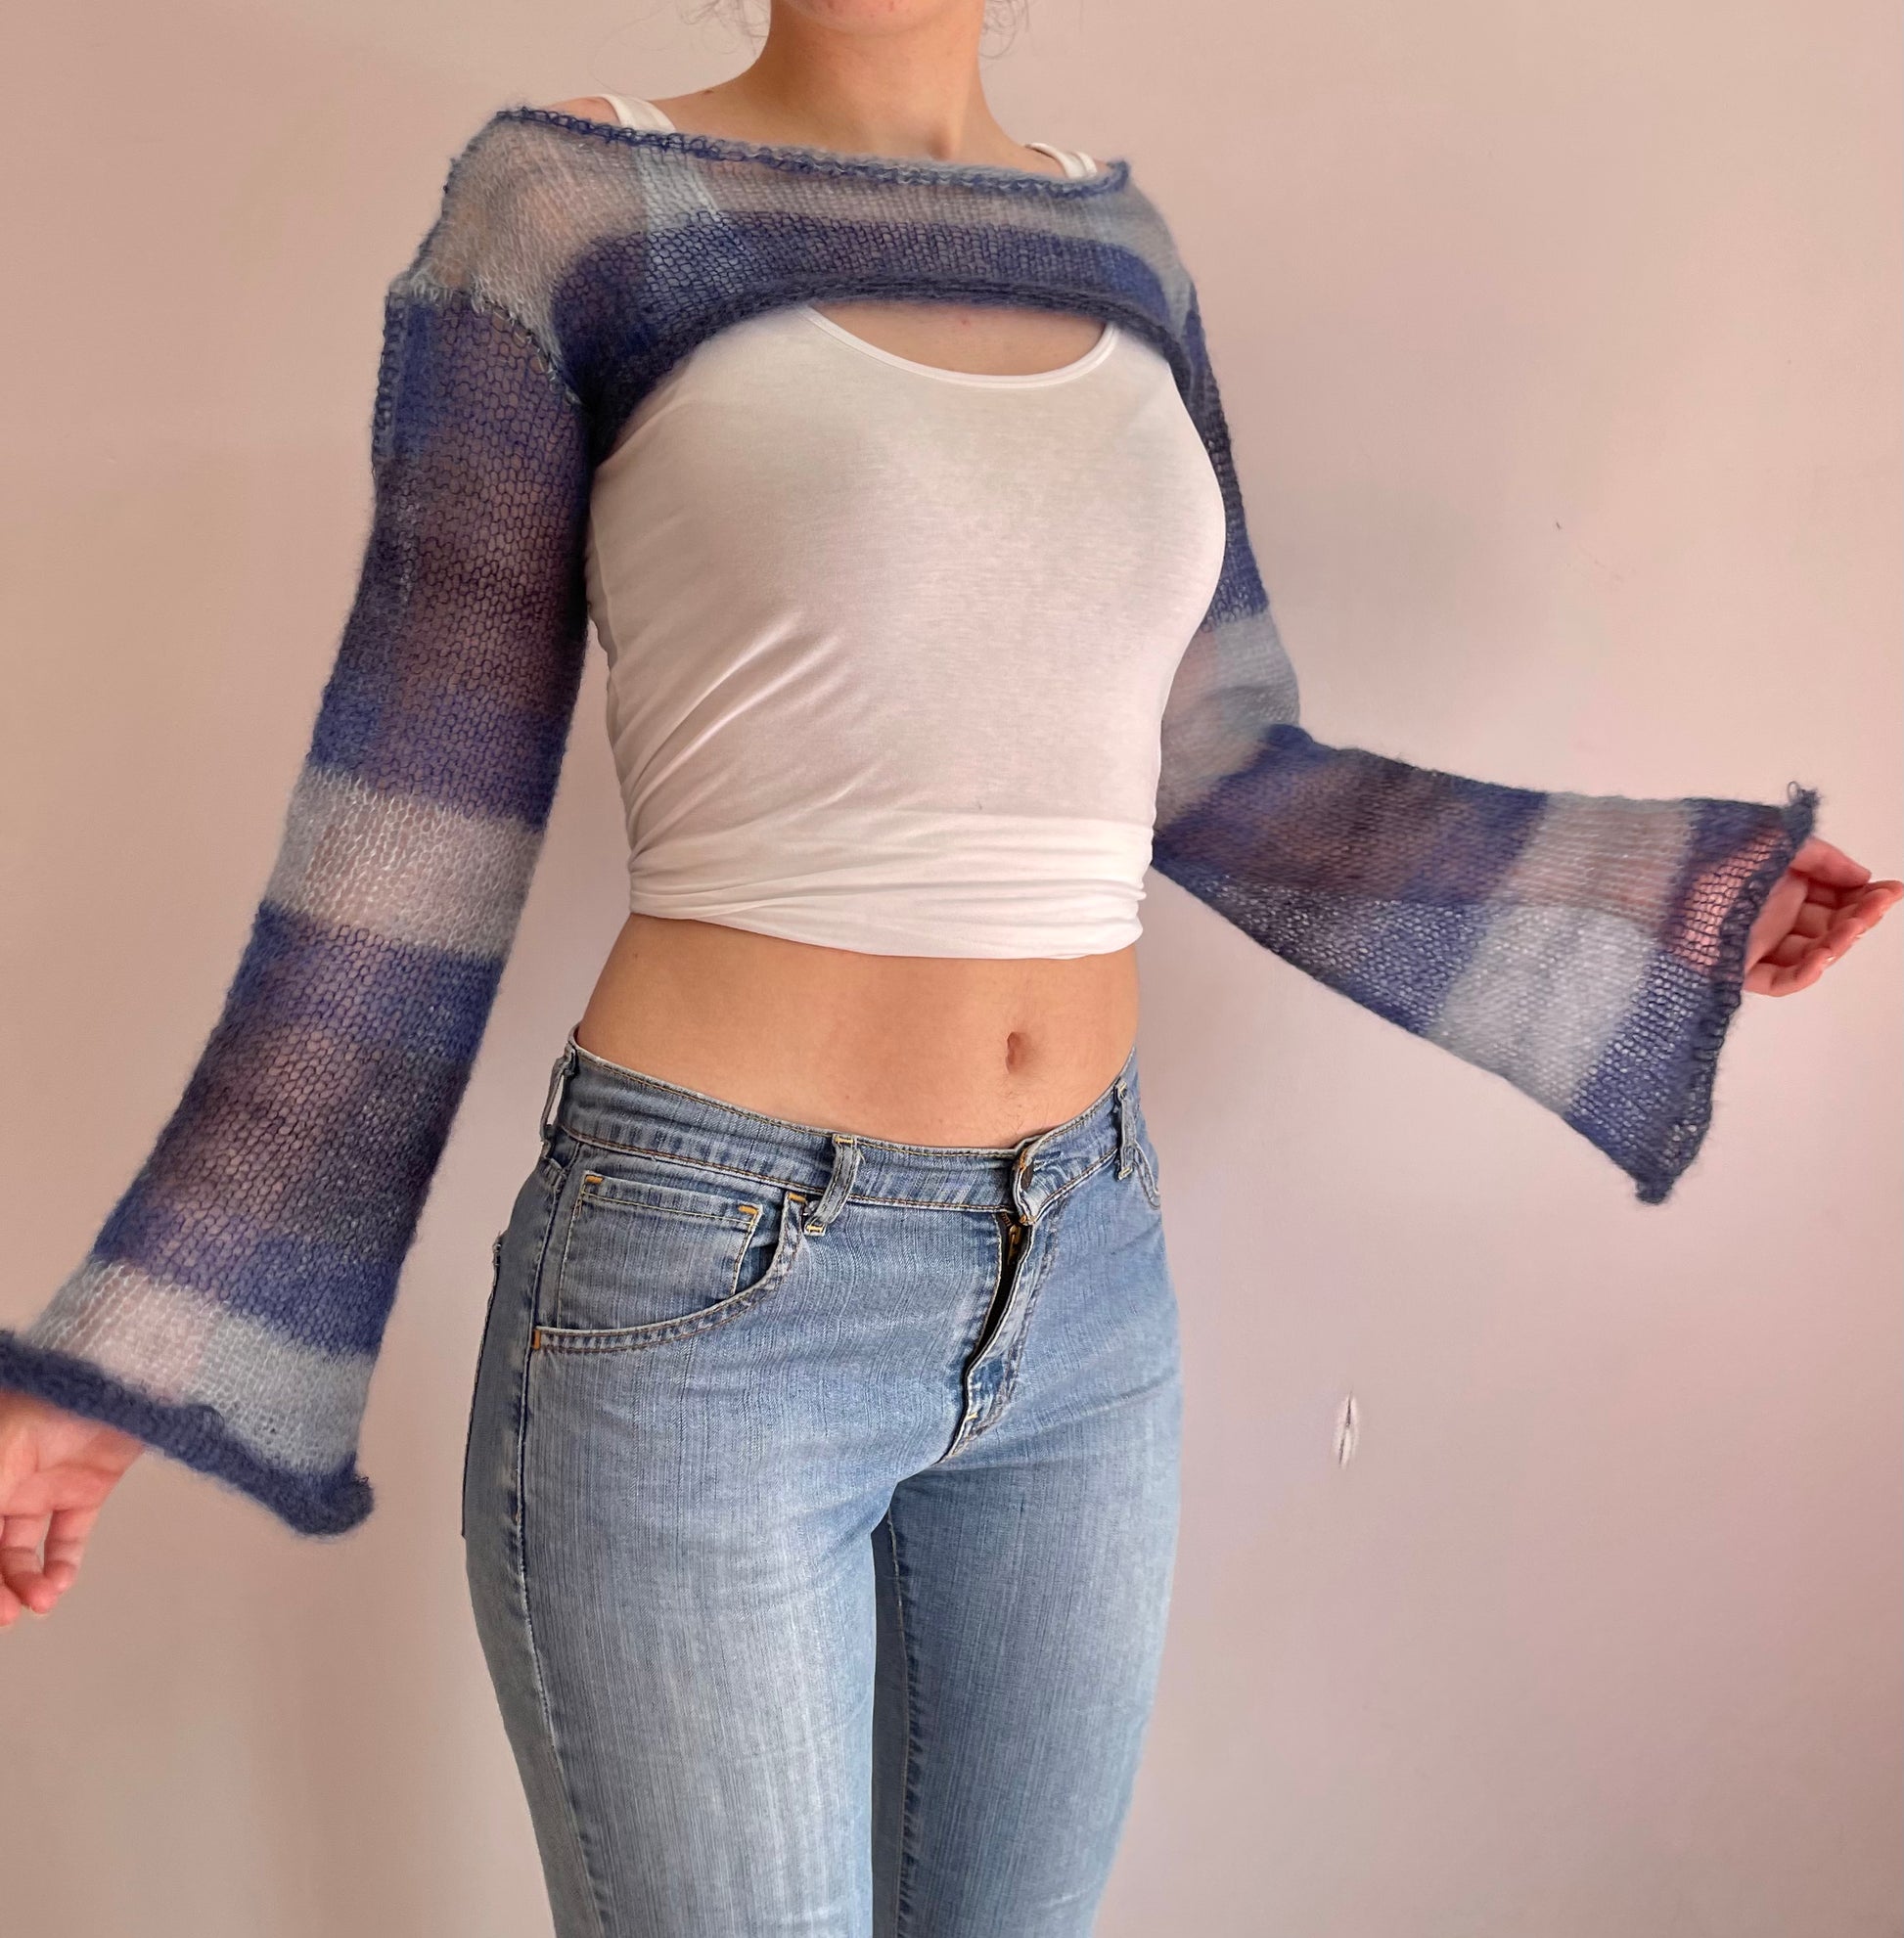 Mohair sweater cropped fuzzy top sexy hand knitted light soft